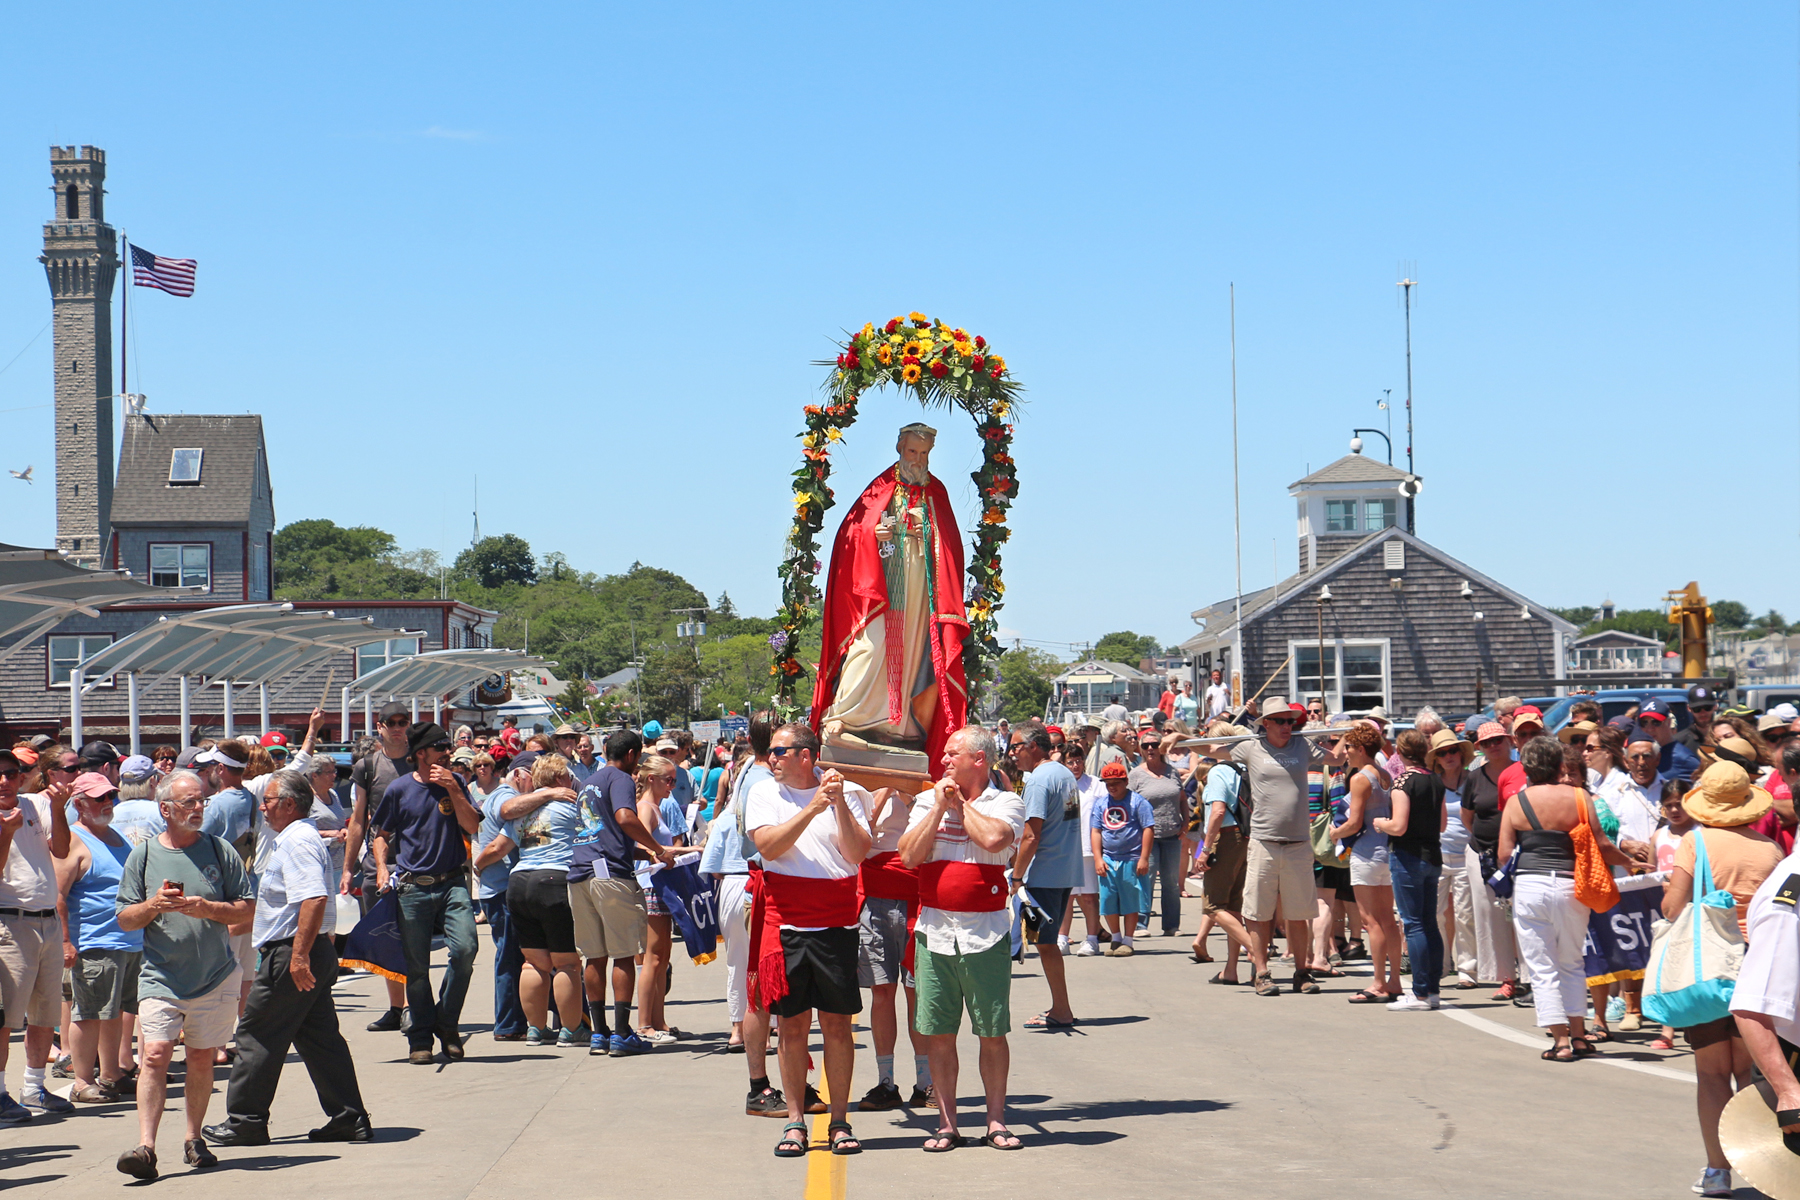 A statue of Saint Peter sporting the colors of the Portuguese flag is carried onto MacMillian Pier. In the background to the left stands the Pilgrim Monument, built in 1910 to commemorate the 1620 signing of the Mayflower Compact in Provincetown.